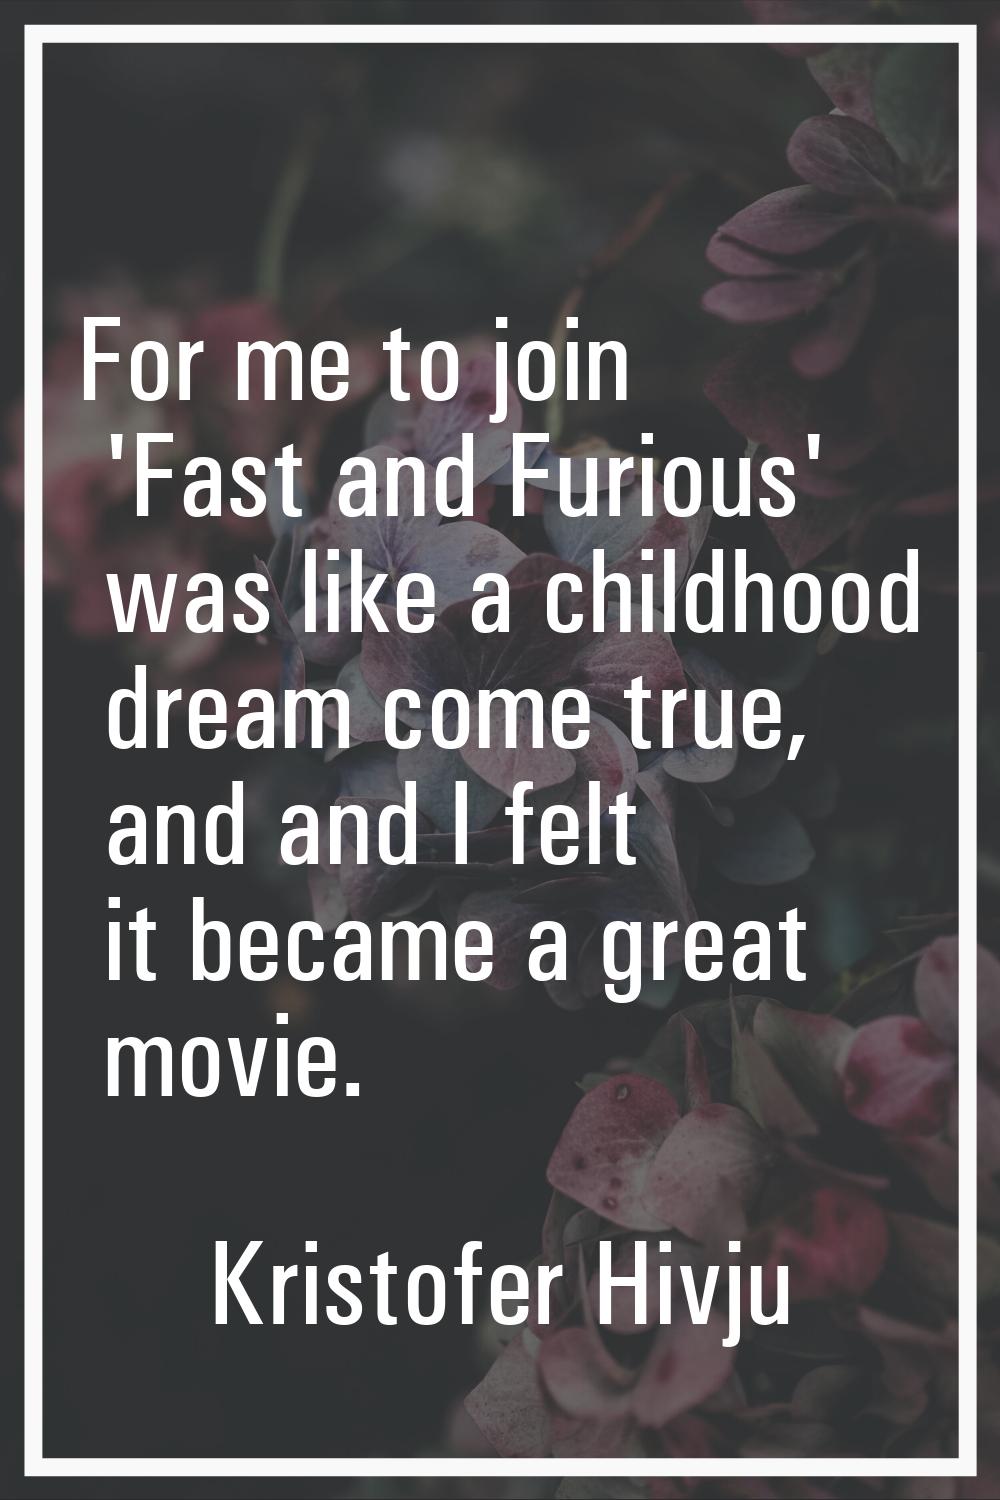 For me to join 'Fast and Furious' was like a childhood dream come true, and and I felt it became a 